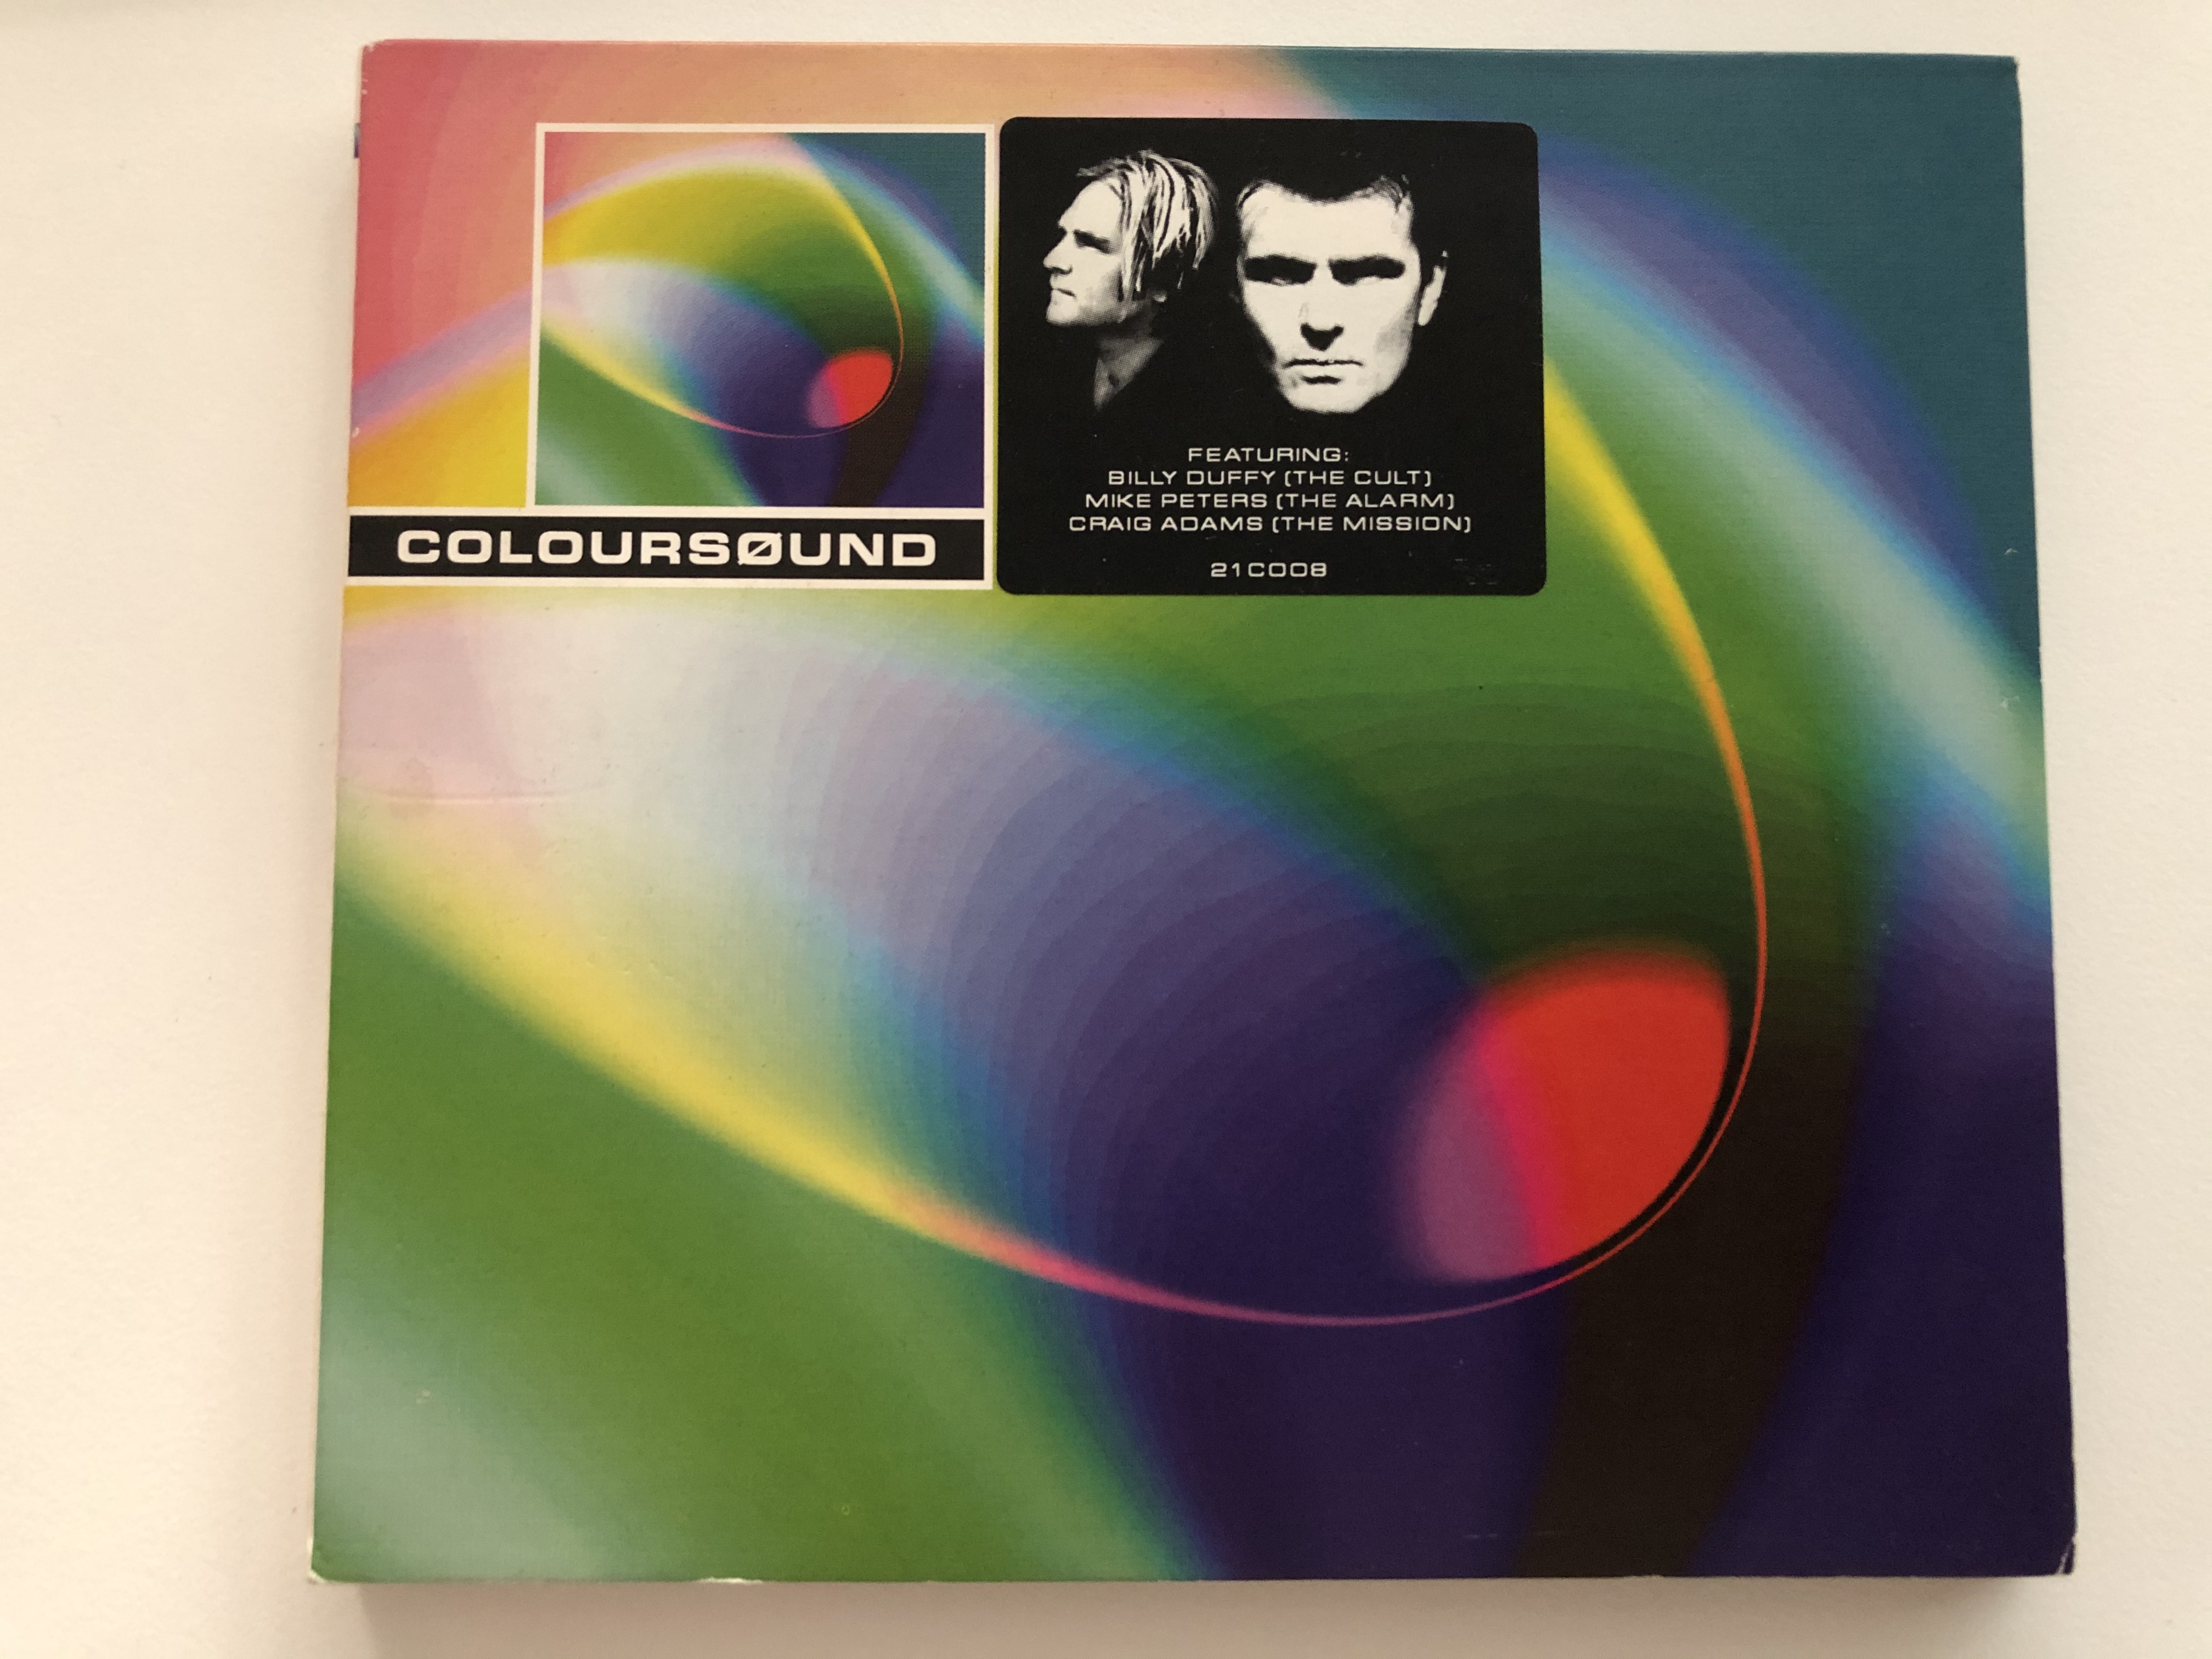 colours-und-featuring-billy-duffy-the-cult-mike-peters-the-alarm-craig-adams-the-mission-the-twenty-first-century-recording-company-audio-cd-1999-21c008-1-.jpg